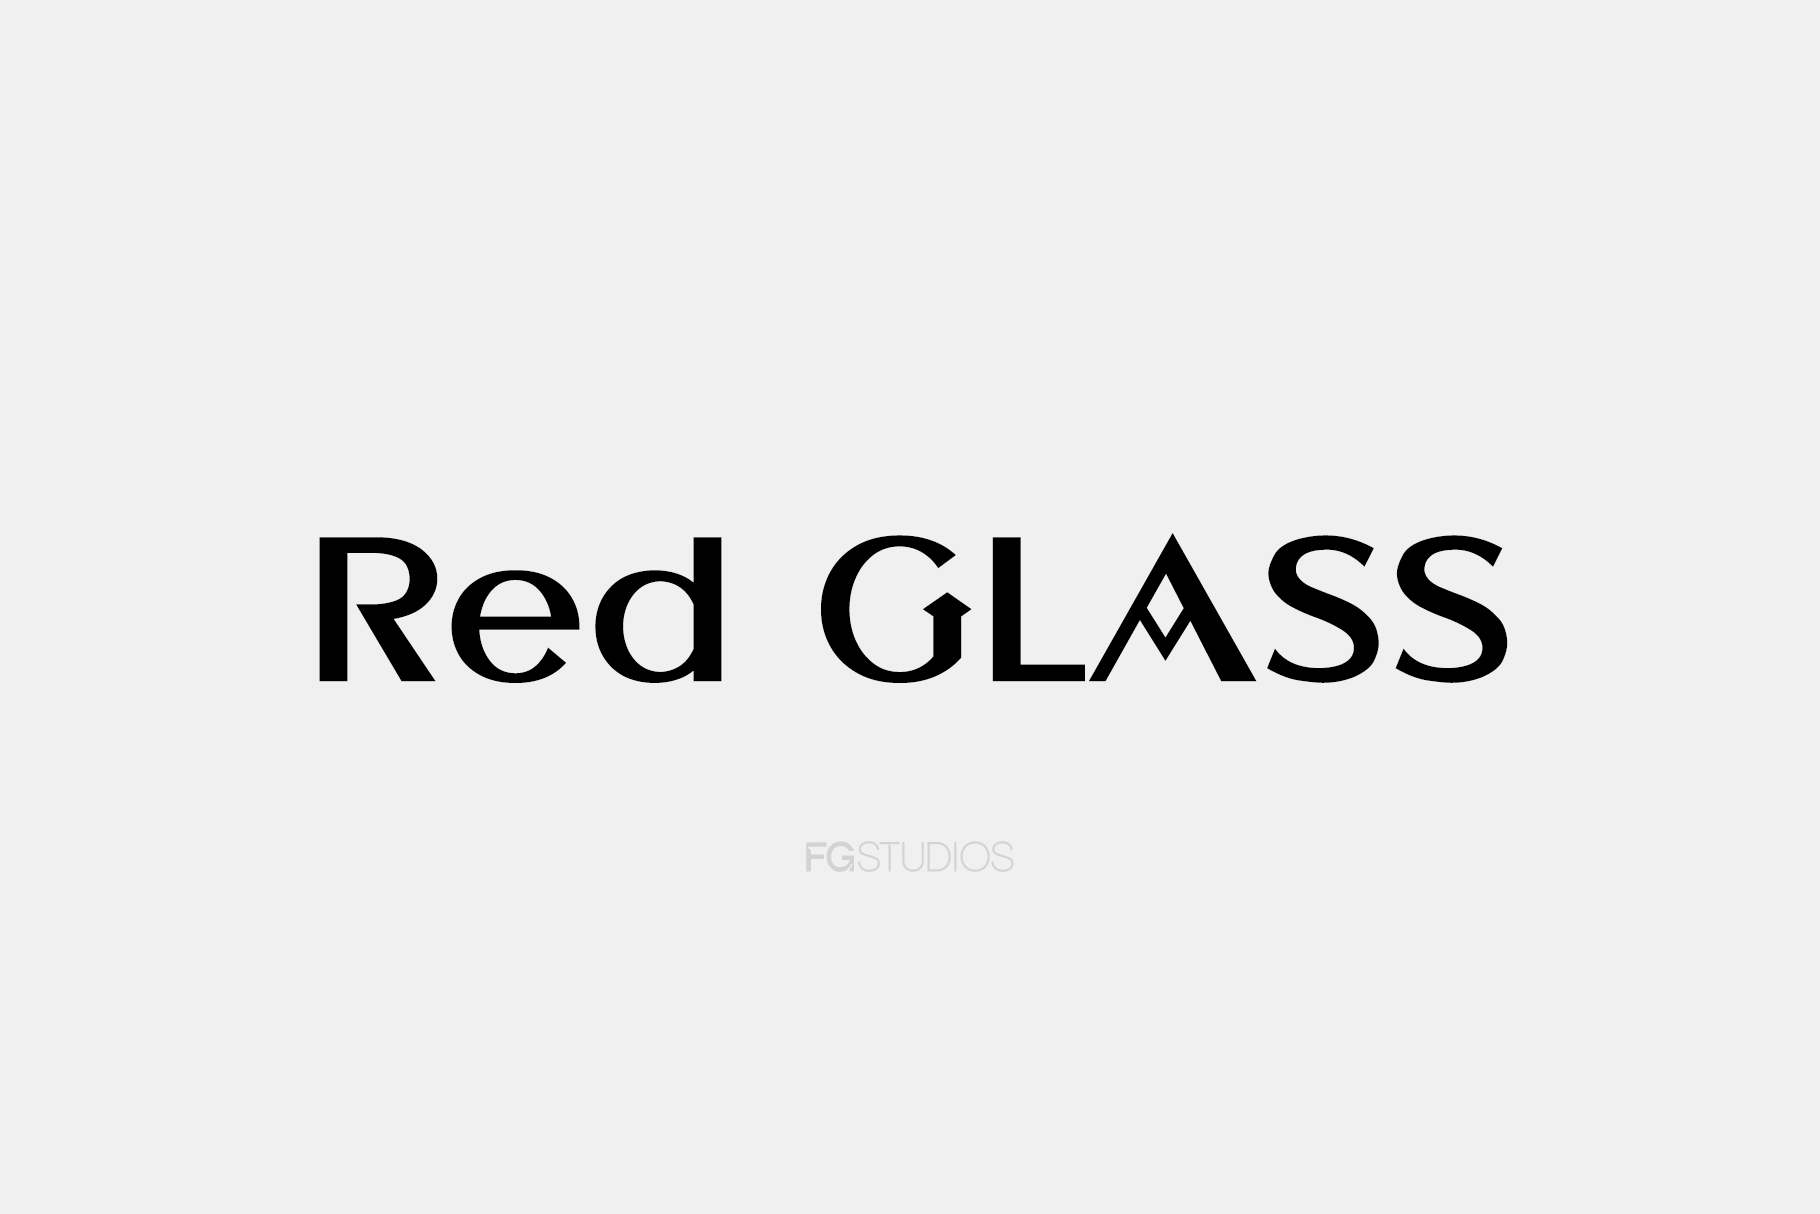 Red Glass